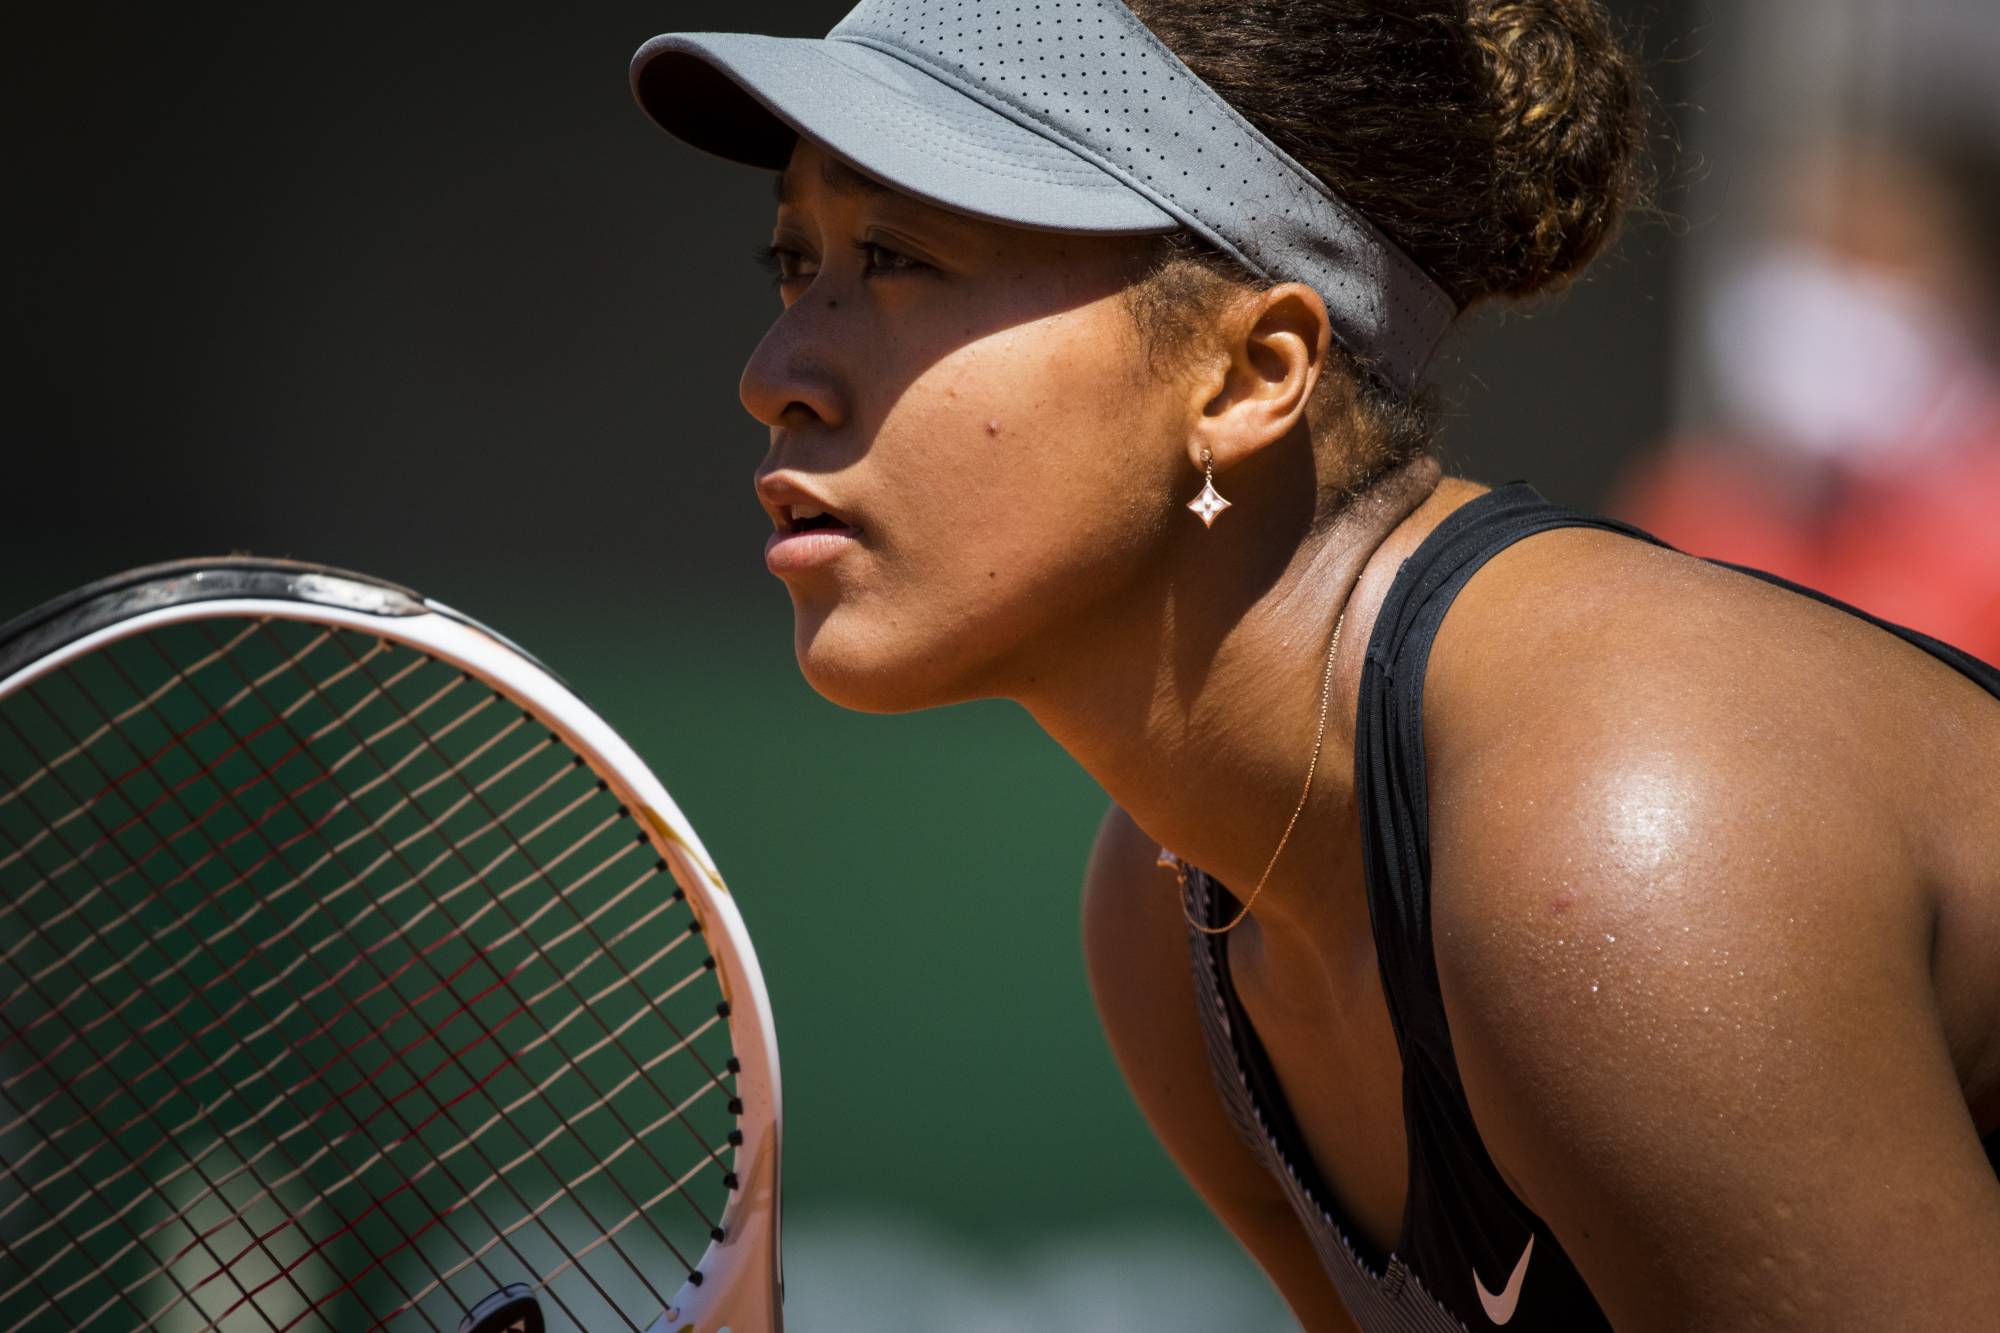 Naomi Osaka Covers Vogue Japan August 2021, Saying She Will Play